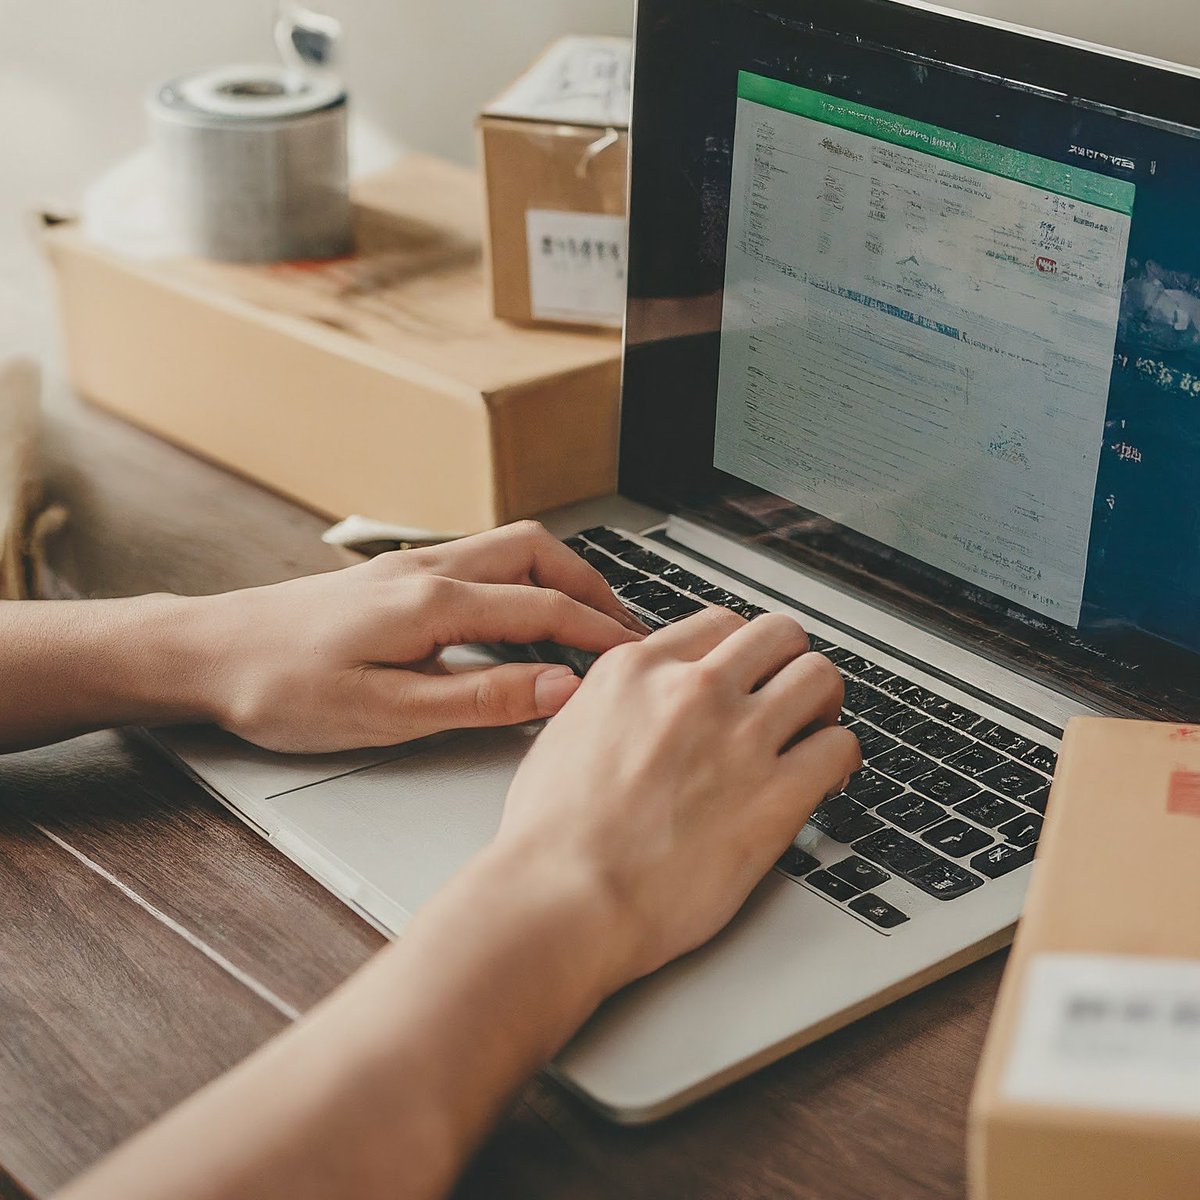 #Shopify #Shipping #Automation #ecommerce #entrepreneurship Save time and money with Shopify's automated shipping solutions! Streamline your process and boost your bottom line. #shopifylife #ecommercetips apps.shopify.com/bpe-by-mits